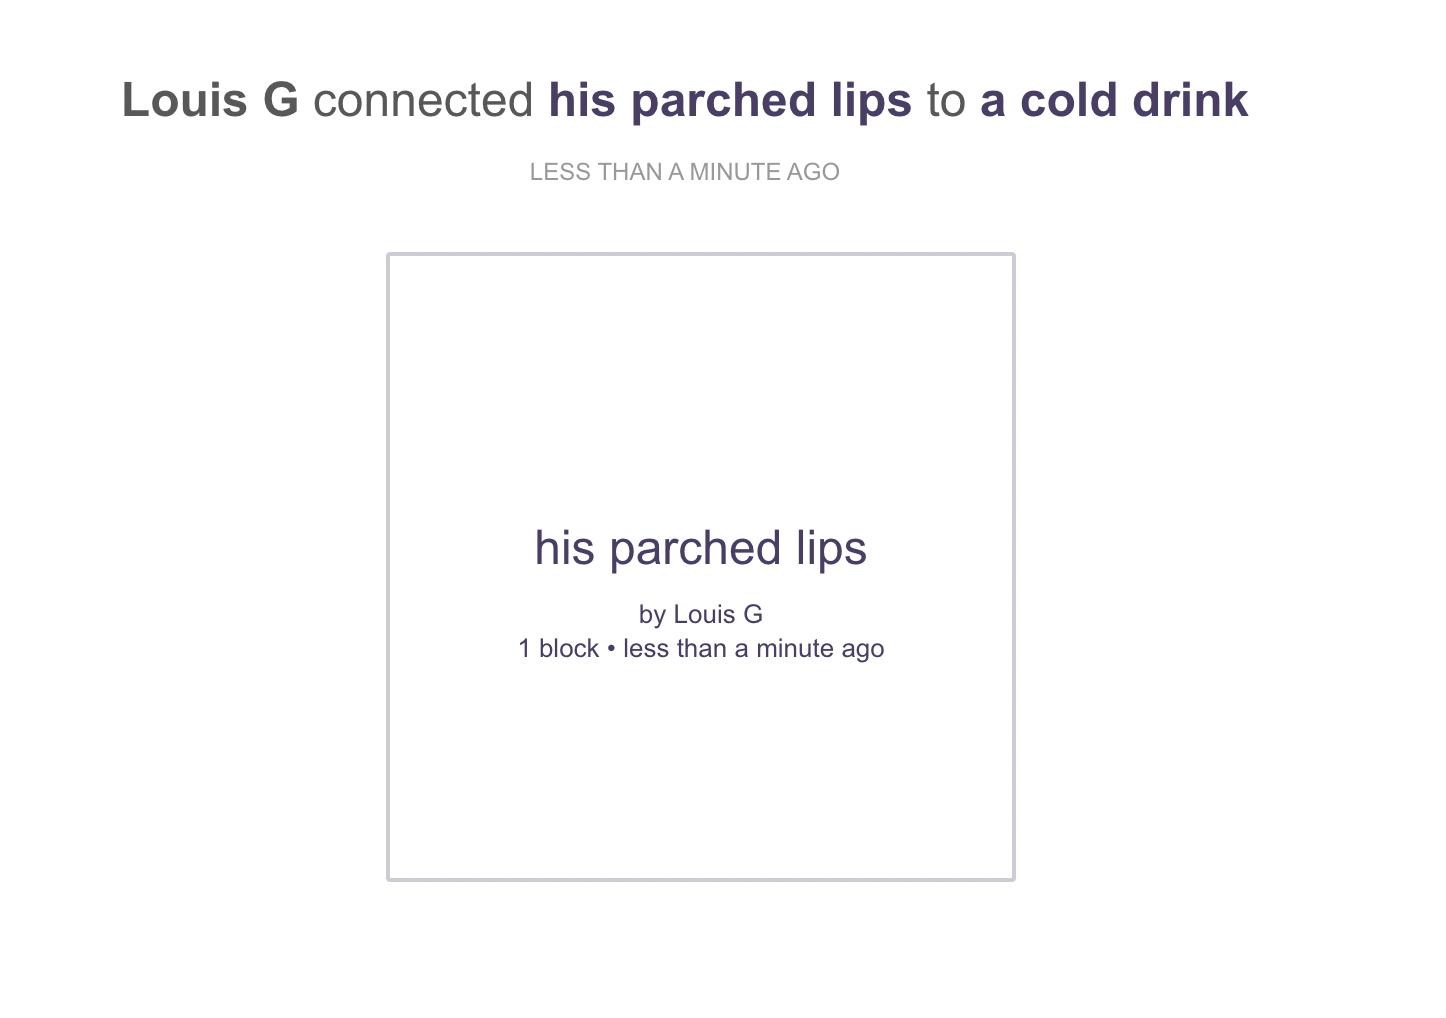 screenshot of an are.na post - Louis G connected his parched lips to a cold drink